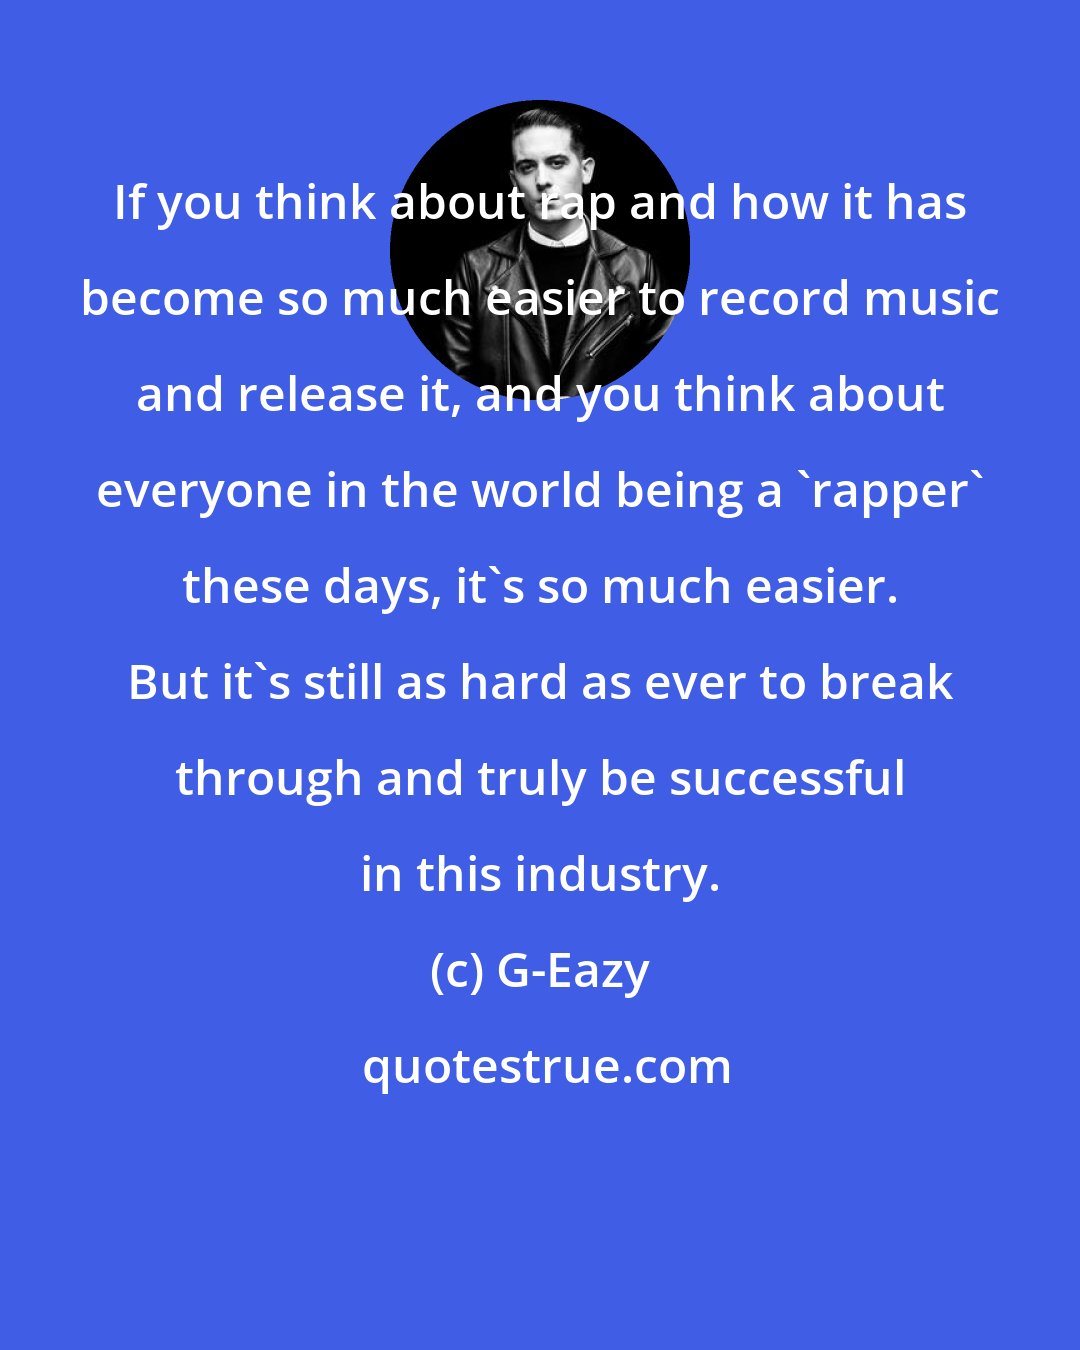 G-Eazy: If you think about rap and how it has become so much easier to record music and release it, and you think about everyone in the world being a 'rapper' these days, it's so much easier. But it's still as hard as ever to break through and truly be successful in this industry.